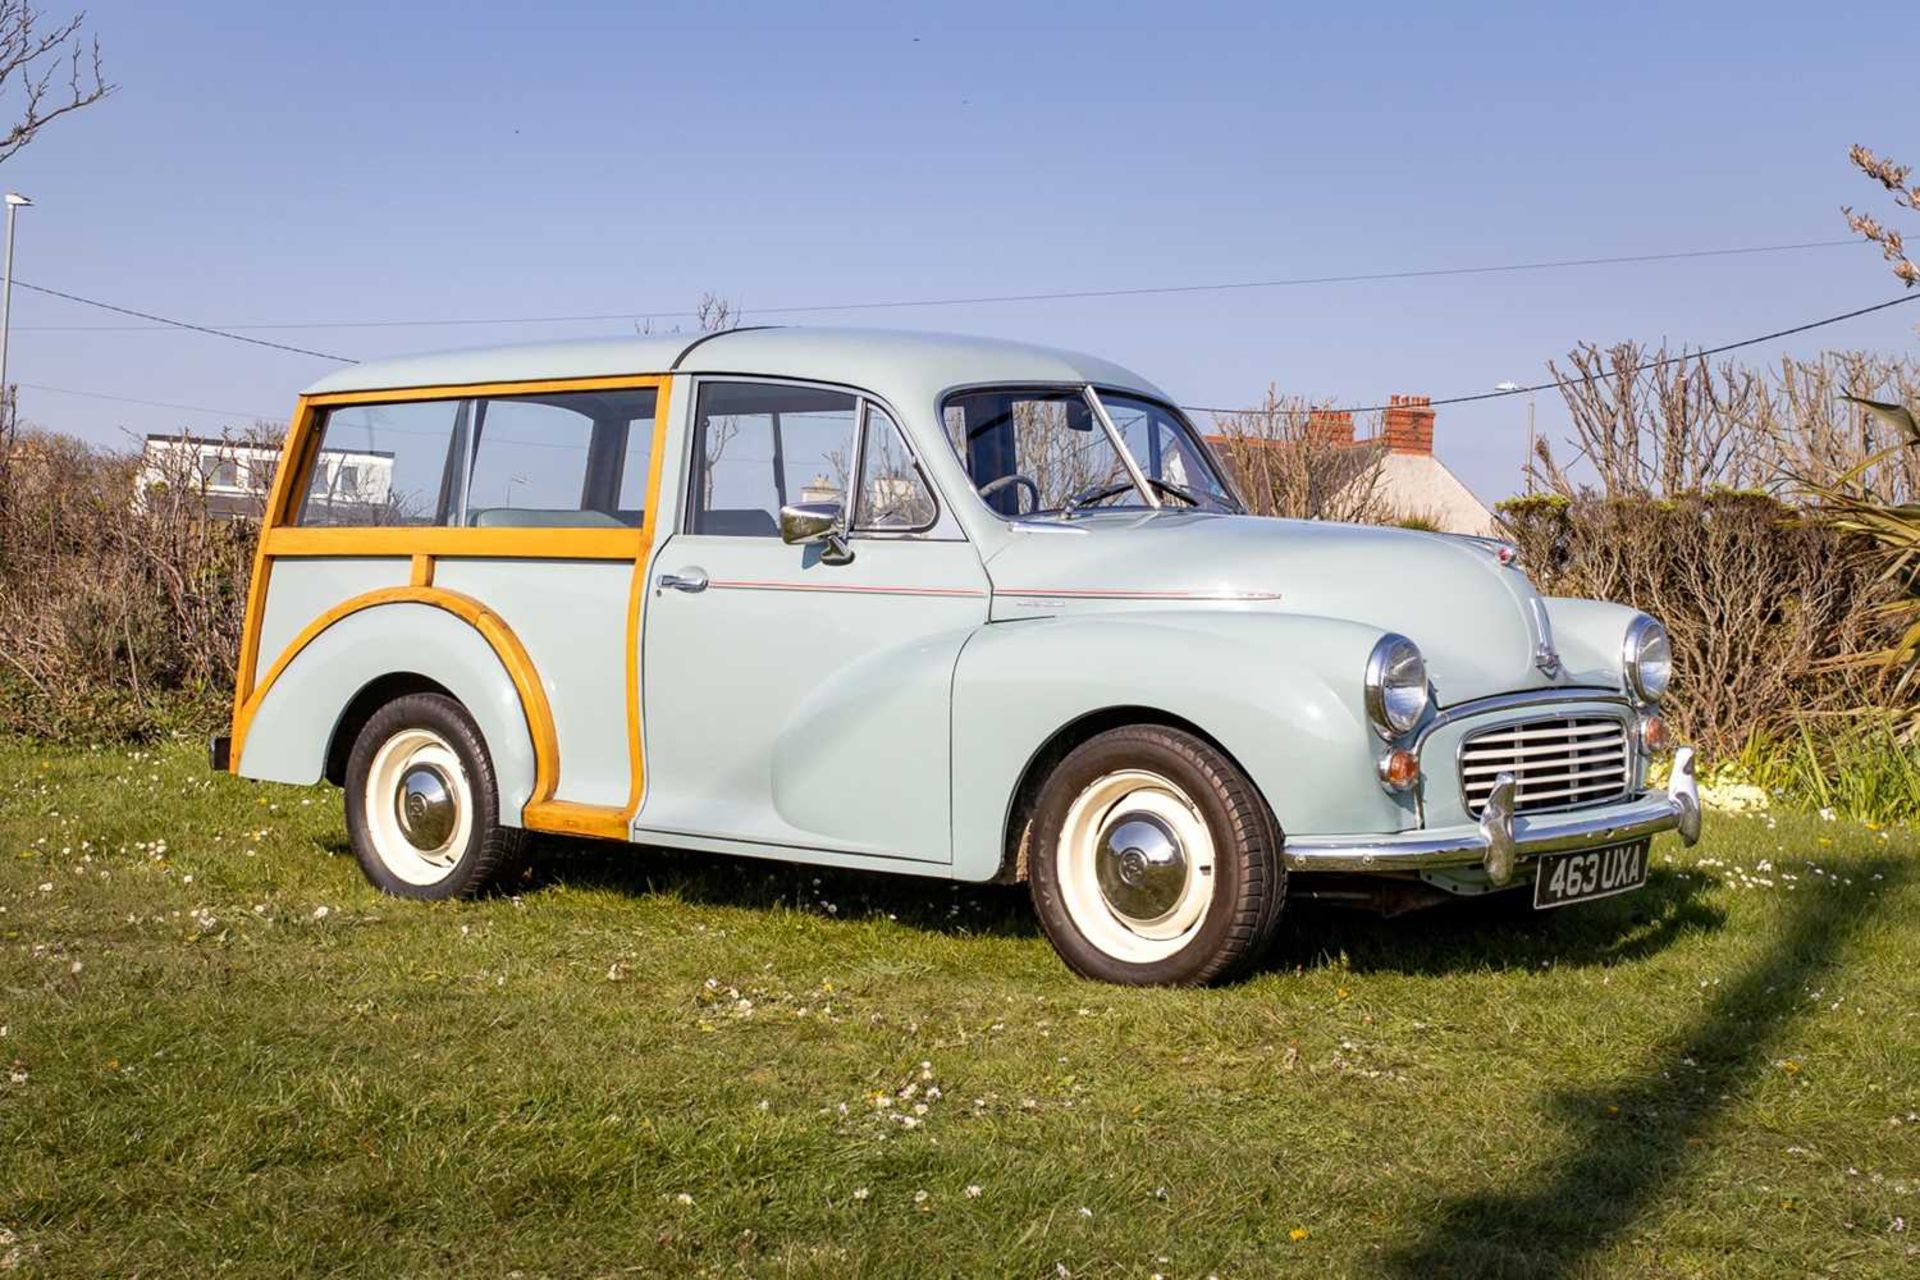 1956 Morris Minor Traveller Uprated with 1275cc engine  - Image 17 of 89